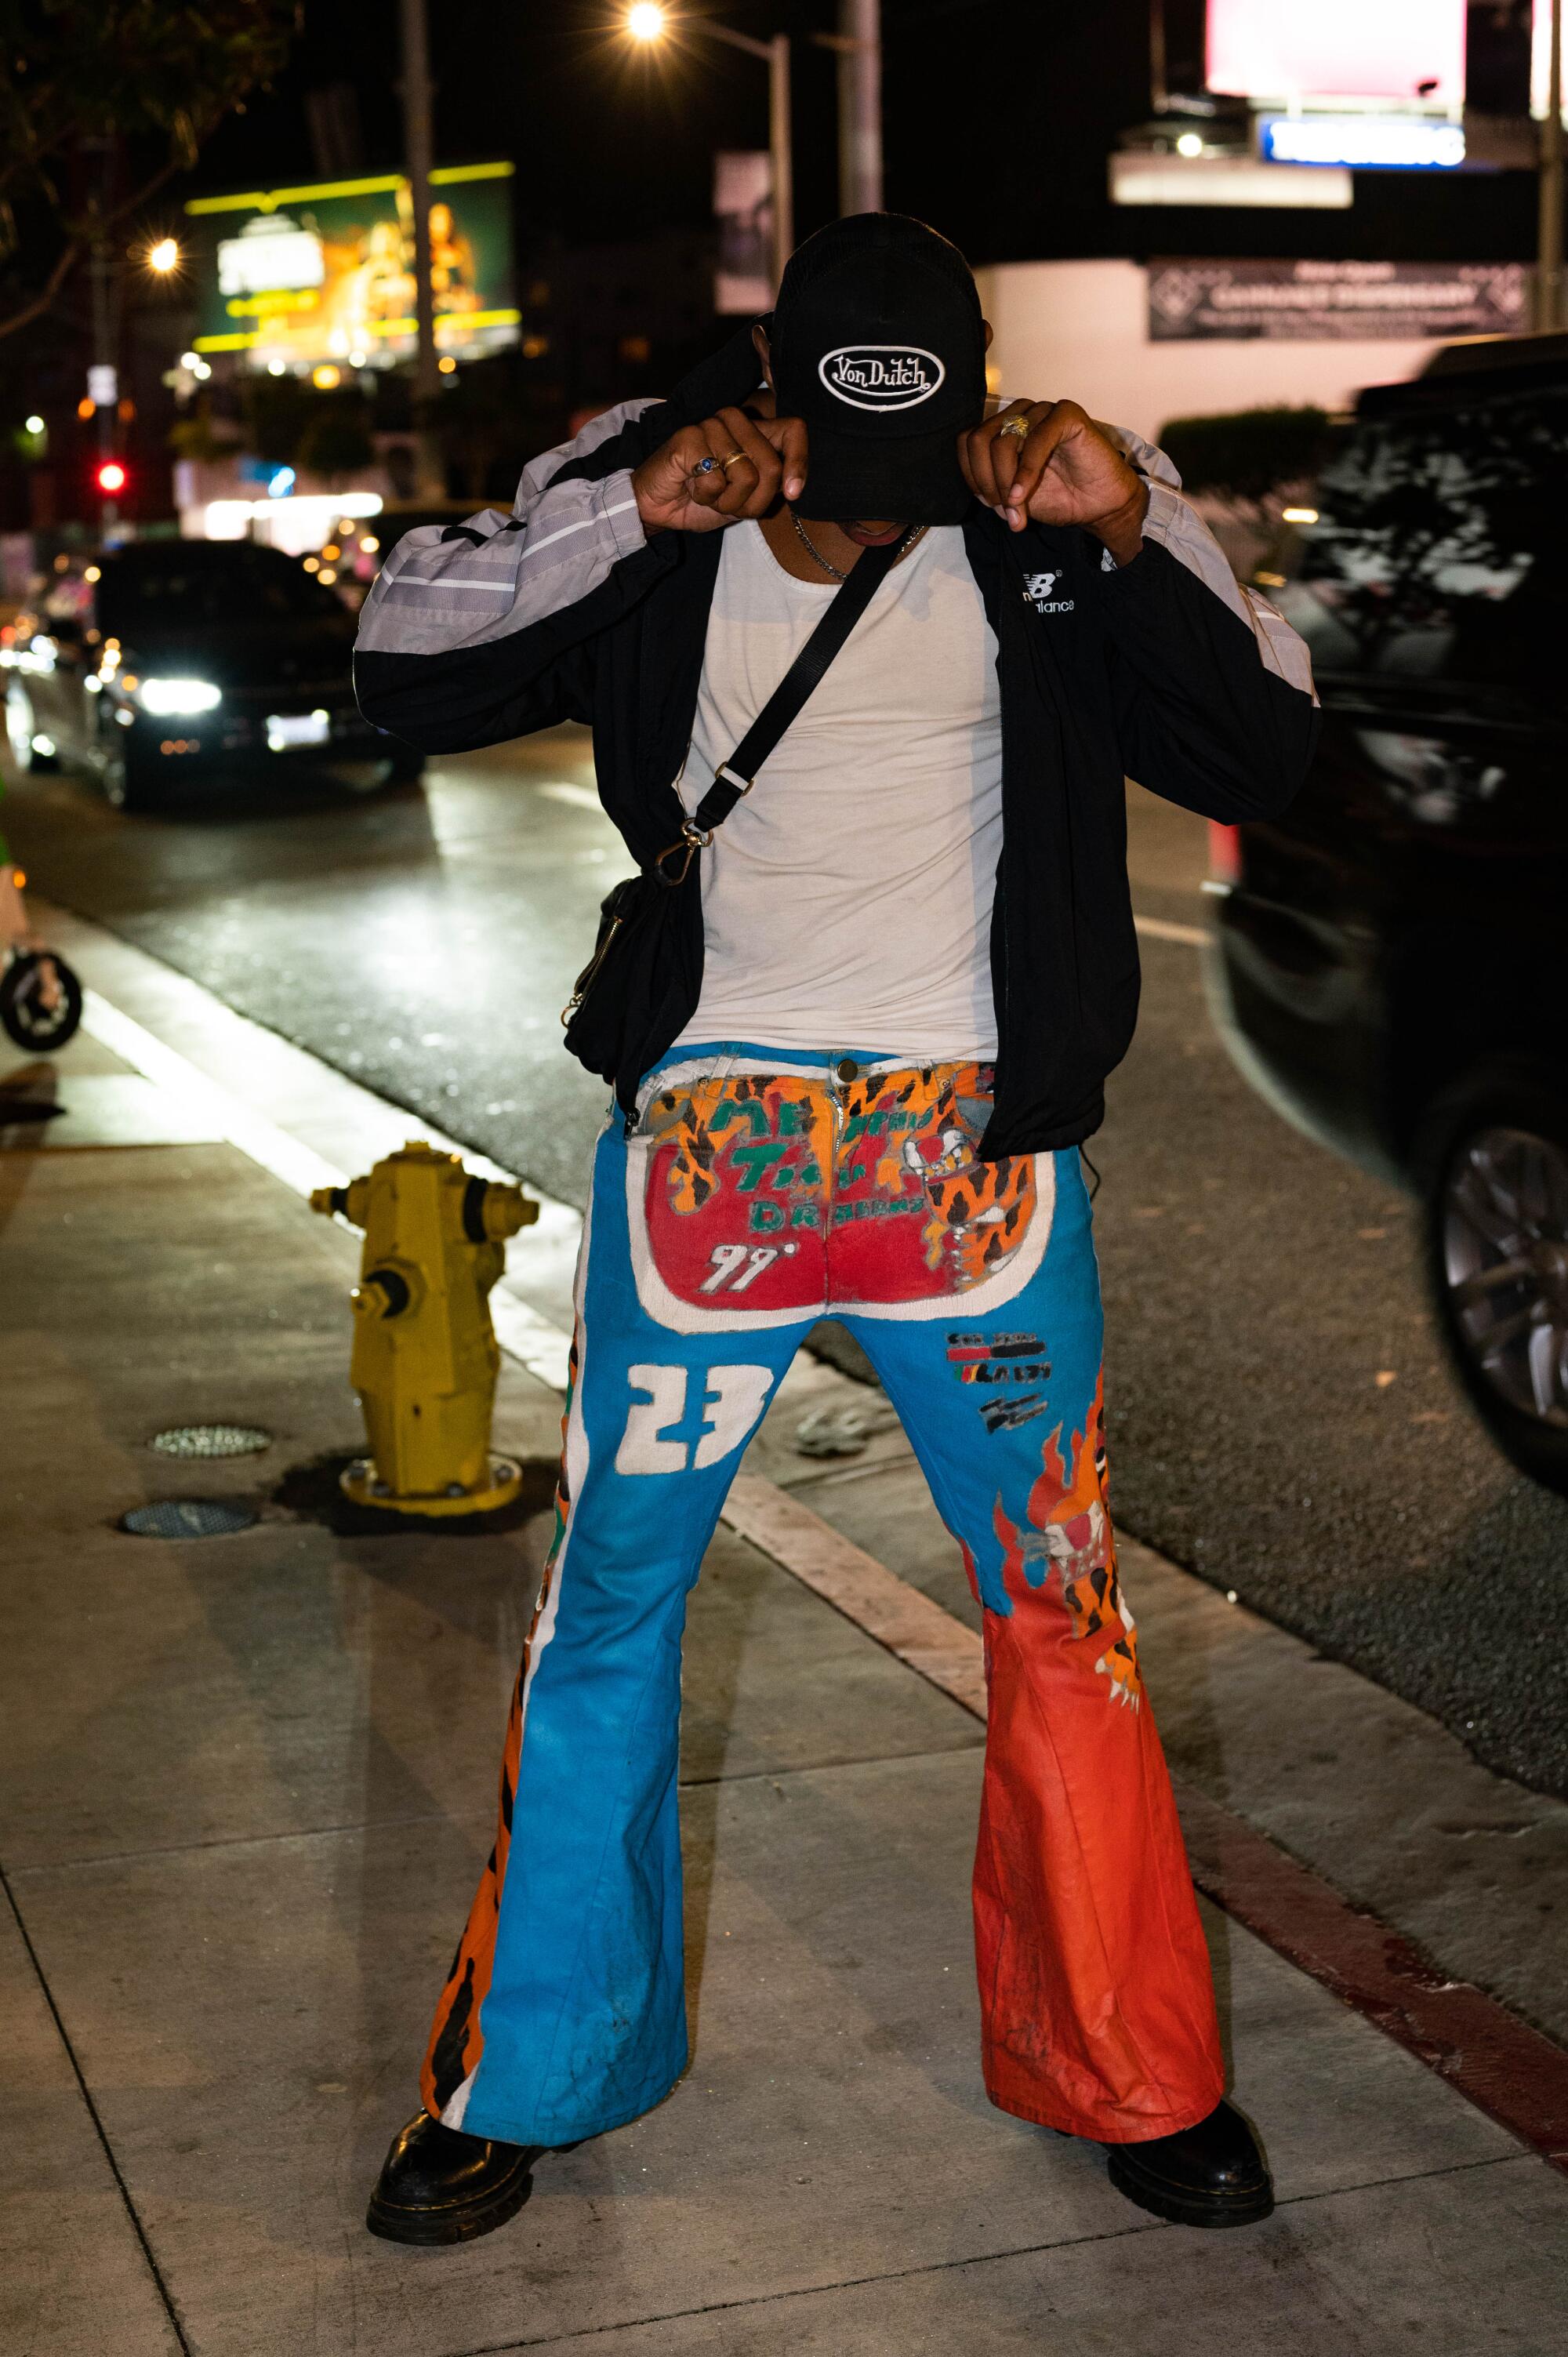 Dailey's street style shots reveal the unique character of style at night.